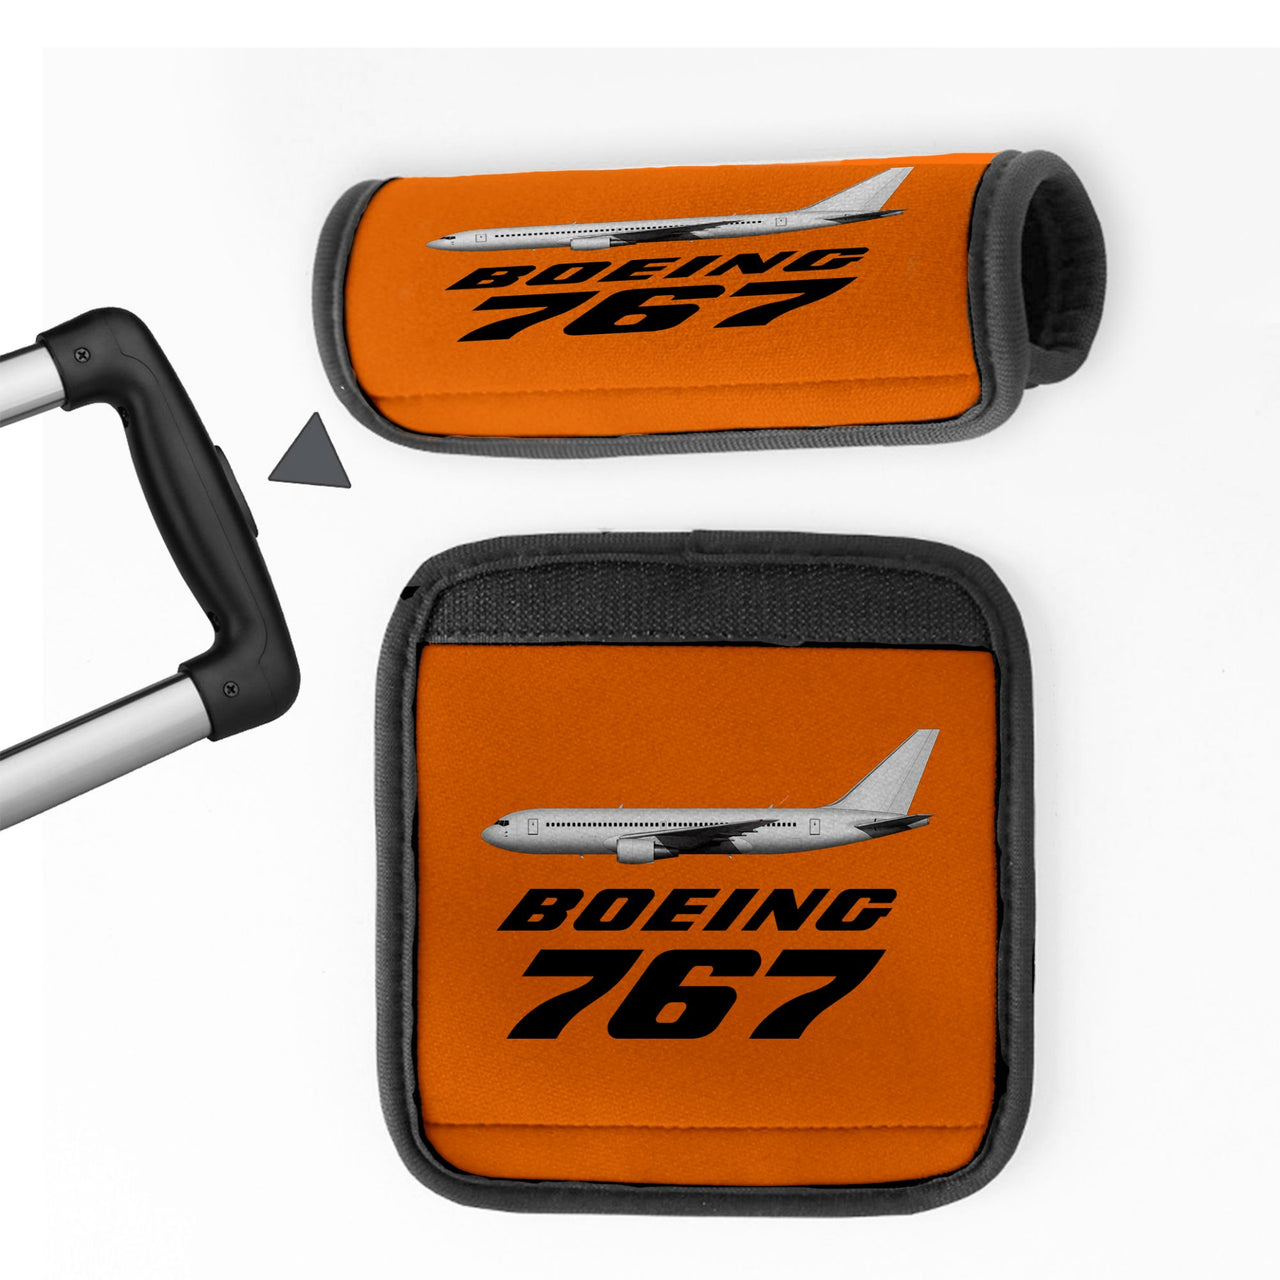 The Boeing 767 Designed Neoprene Luggage Handle Covers